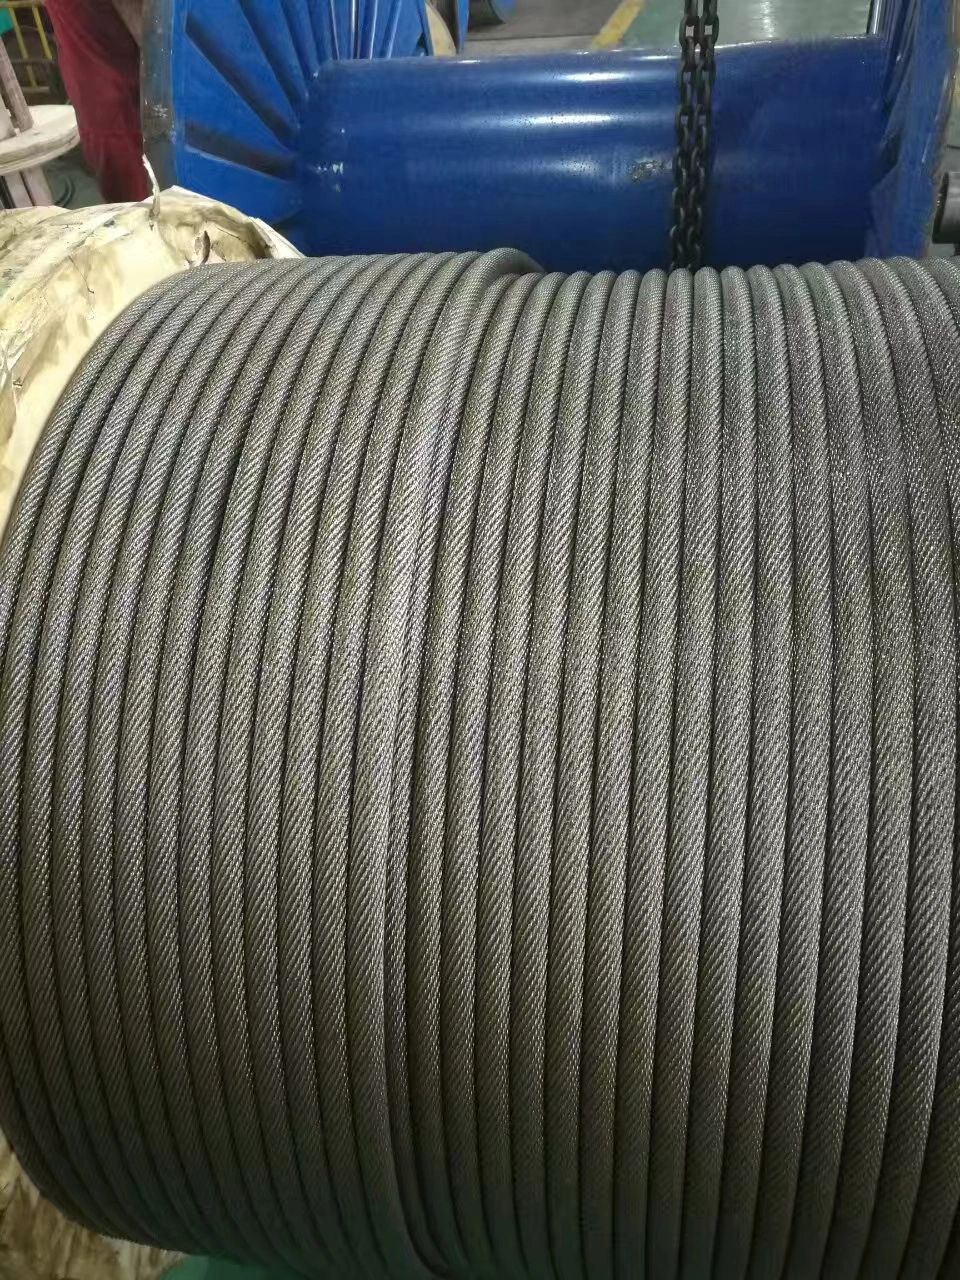 Rhll (ZZ) Wire Rope, Non-Rotating Compacted Steel Cable, 35wxk7